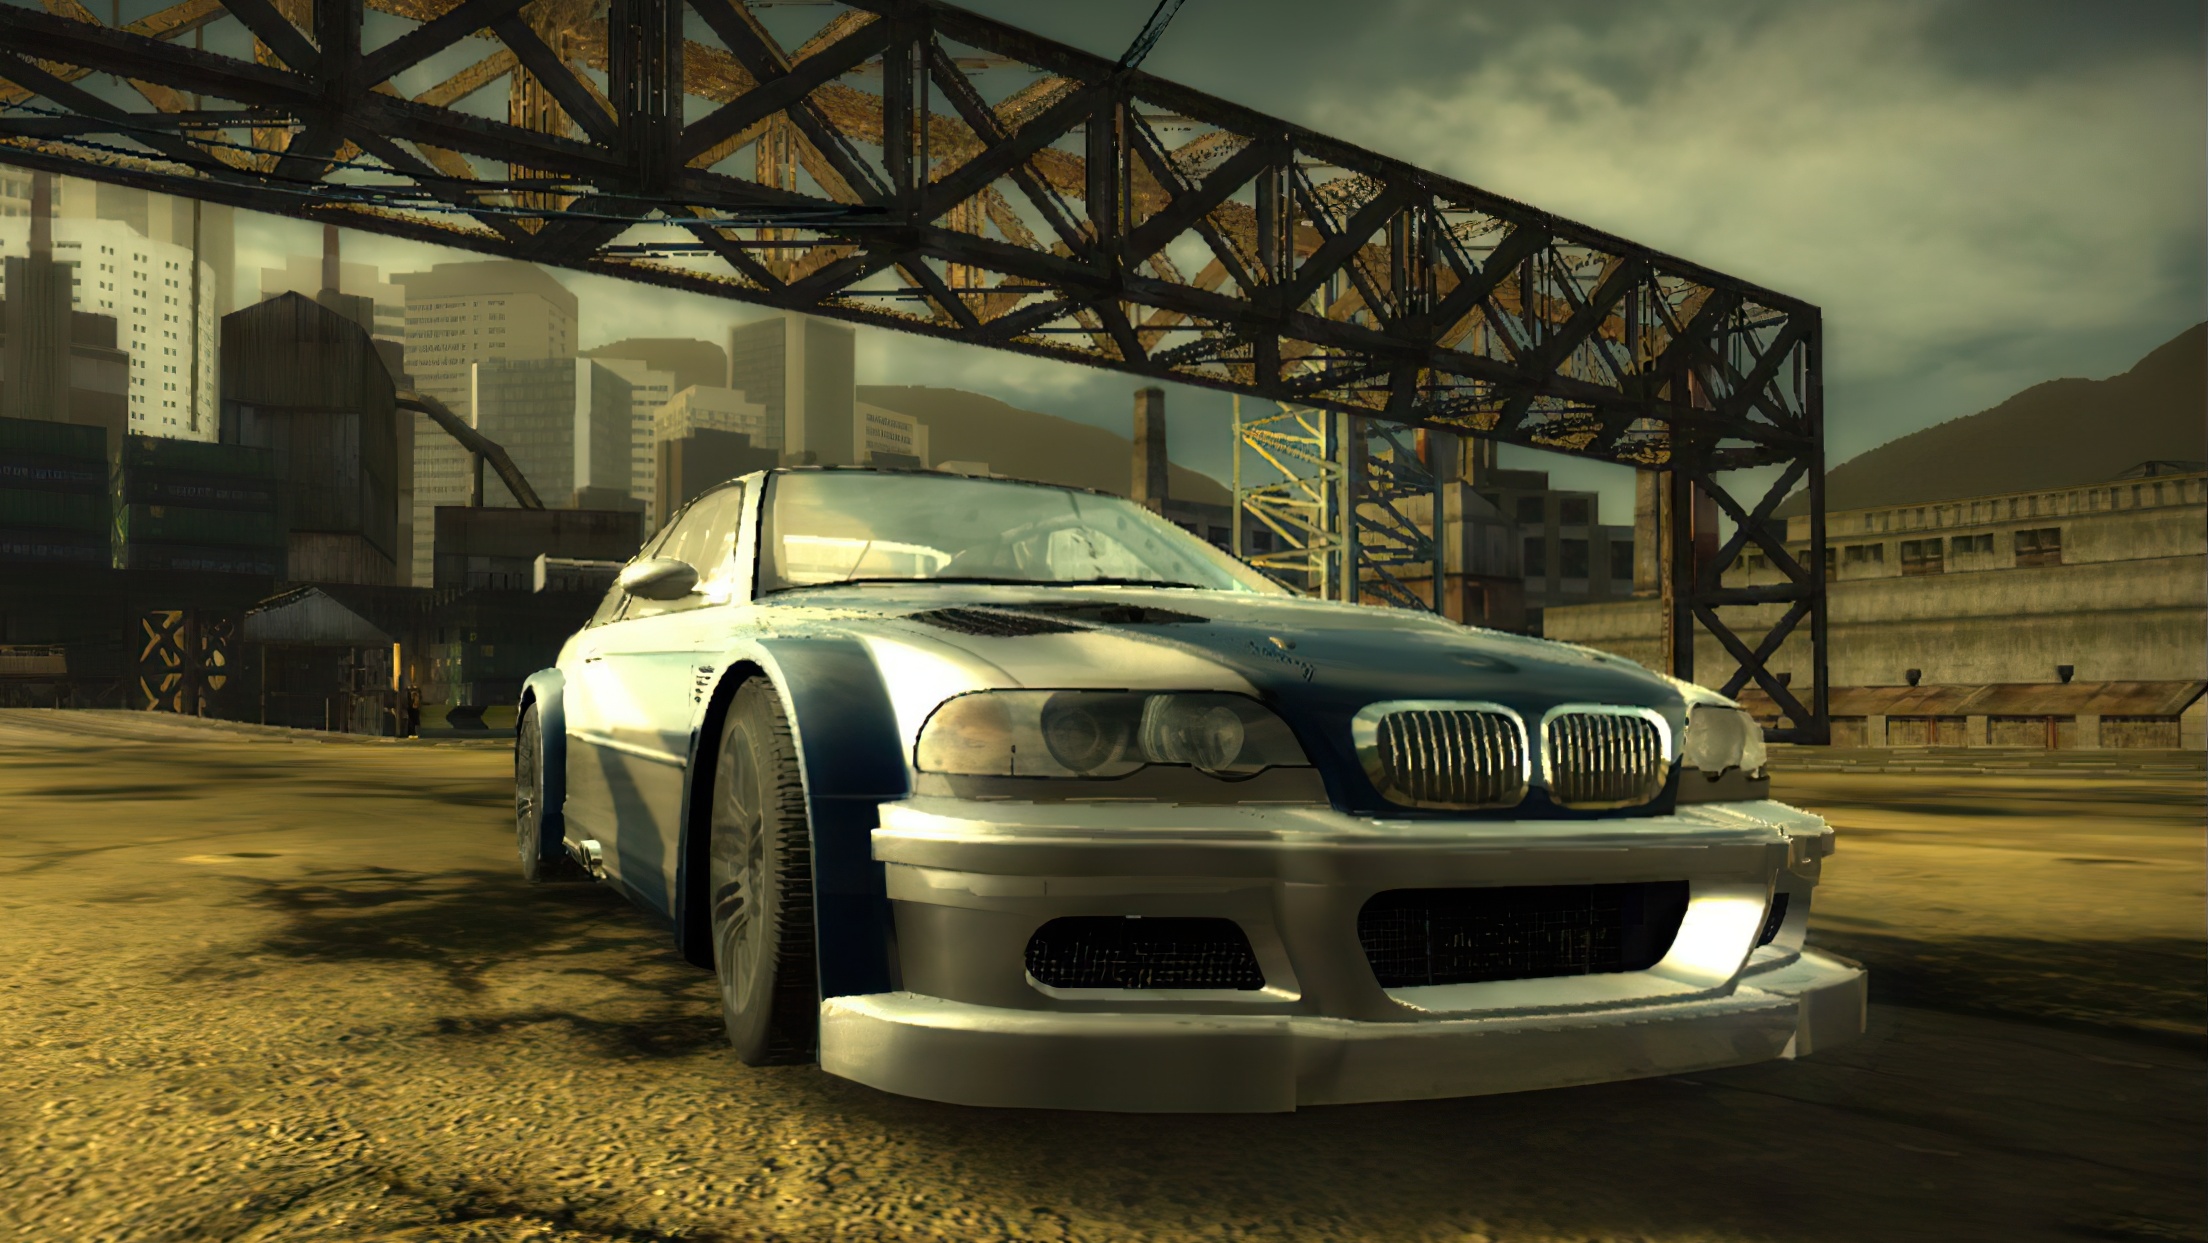 Машины в игре most wanted. BMW m3 GTR. Need for Speed most wanted 2005. Нид фор СПИД most wanted 2005. Нфс МВ 2005.